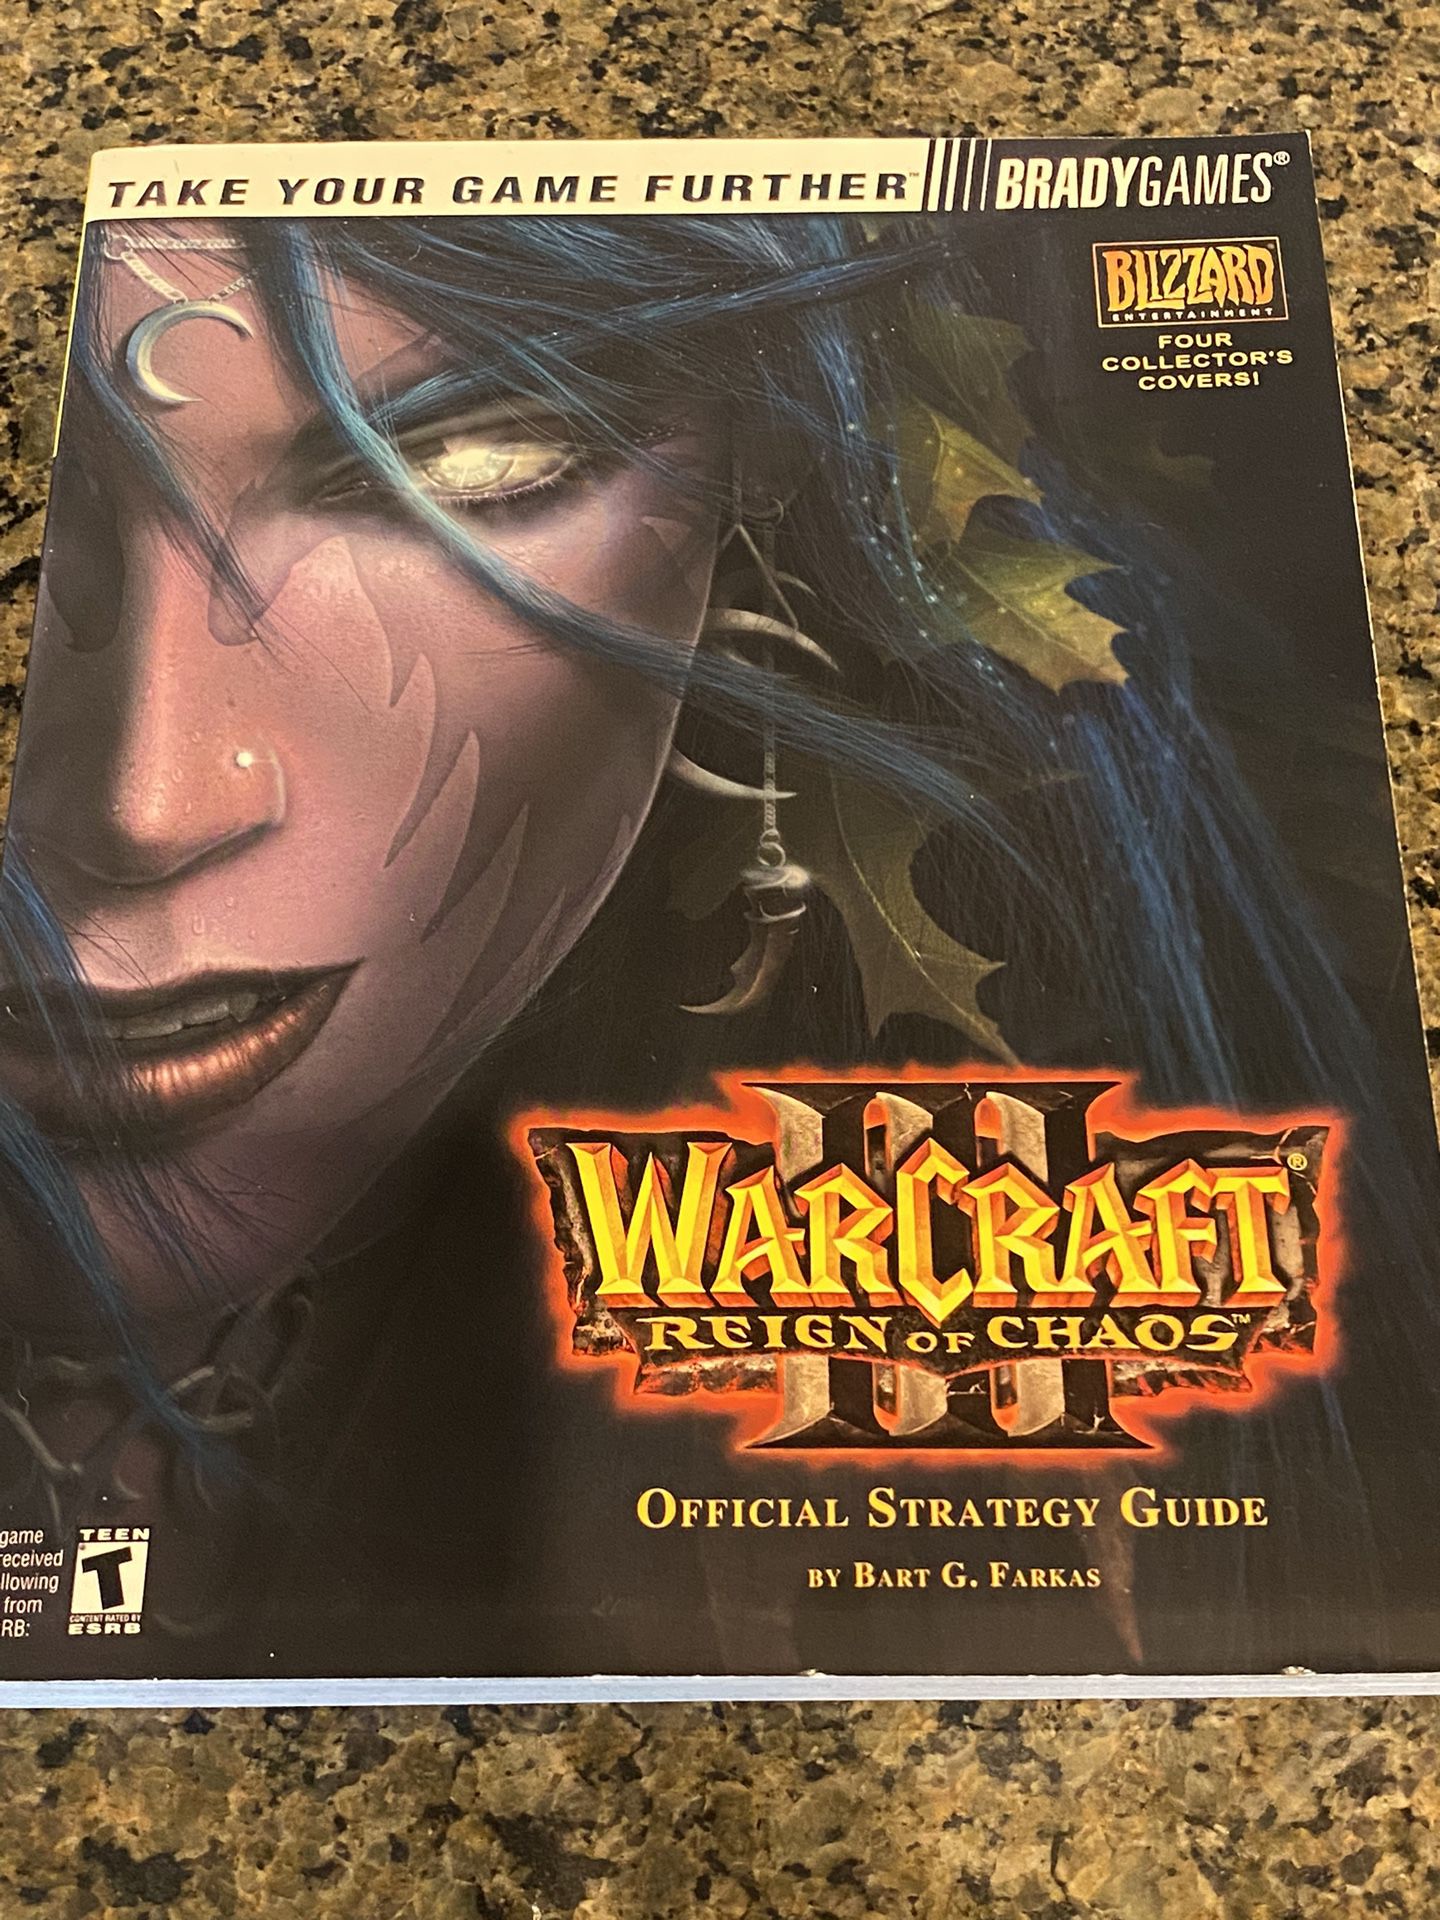 Brady Games Warcraft III Reign Of Chaos Official Strategy Guide With Poster 